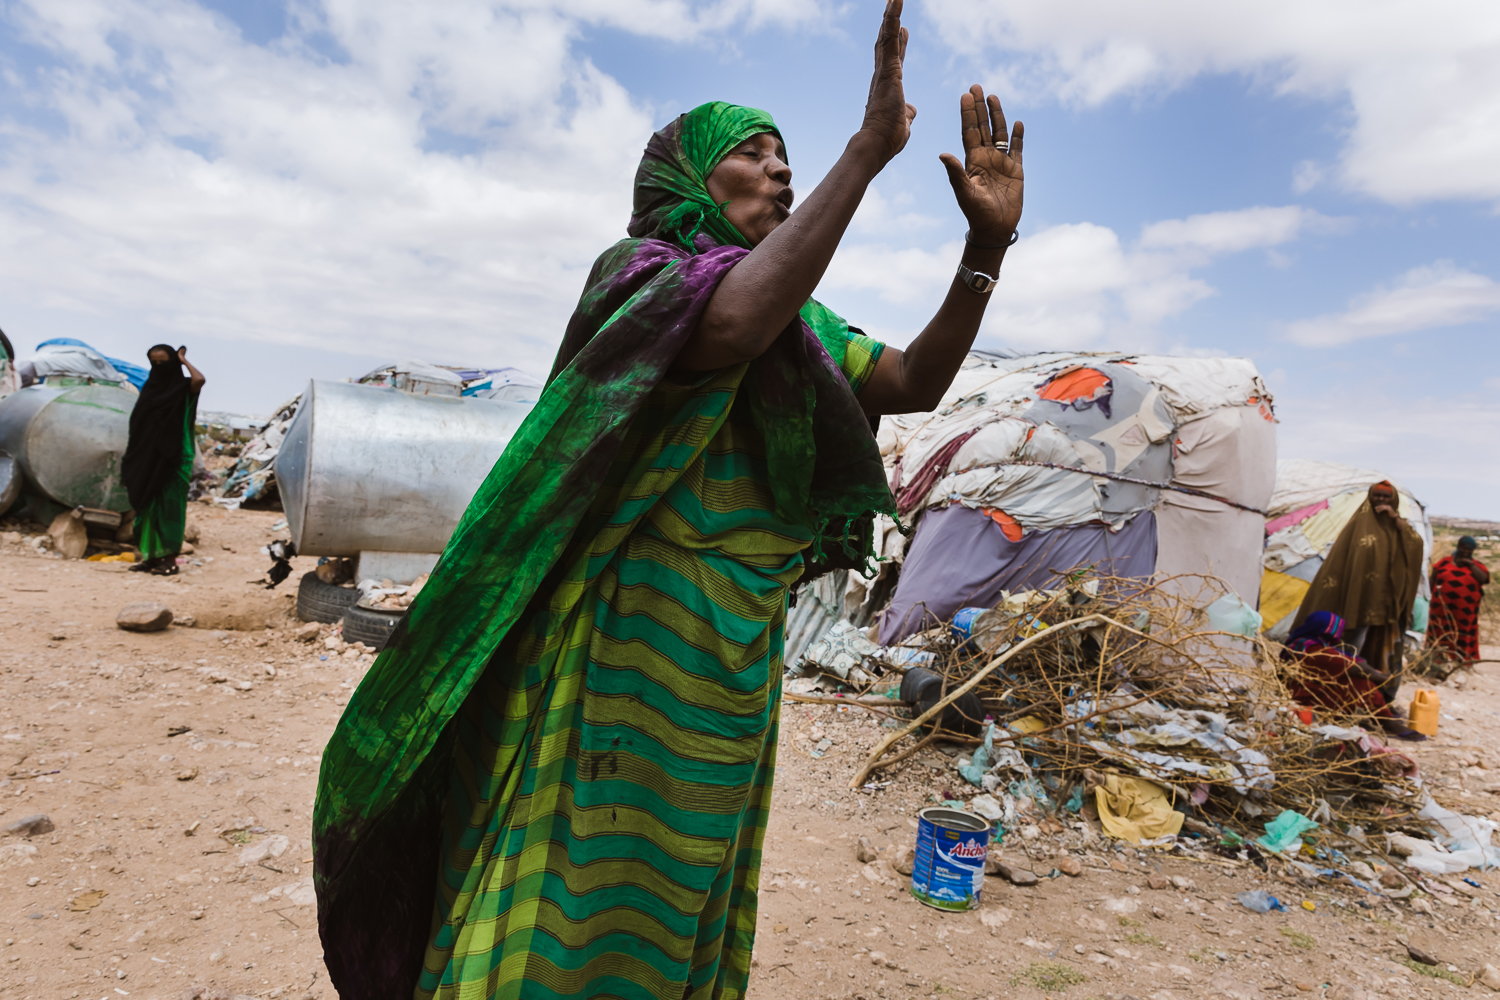 Displaced pastoralists settled near the capital of Somaliland after having lost their livestock and livelihood after recent droughts. Photo by David Verberckt from Waiting for the Rain on SDN.